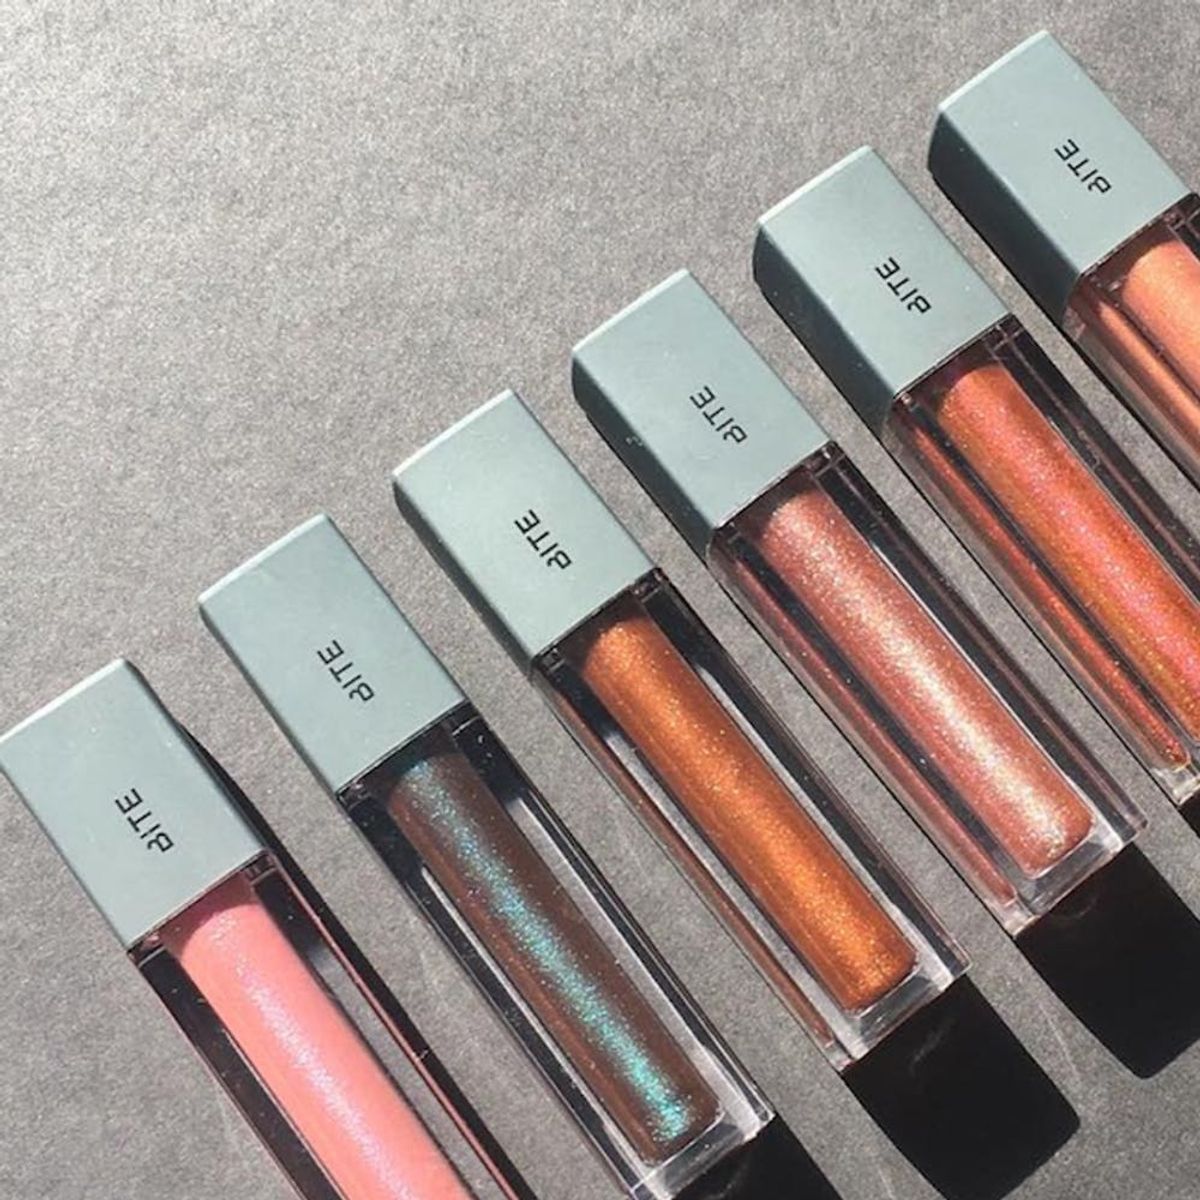 Bite Beauty’s New Holographic Lipglosses Were Inspired by a Tropical Vacay